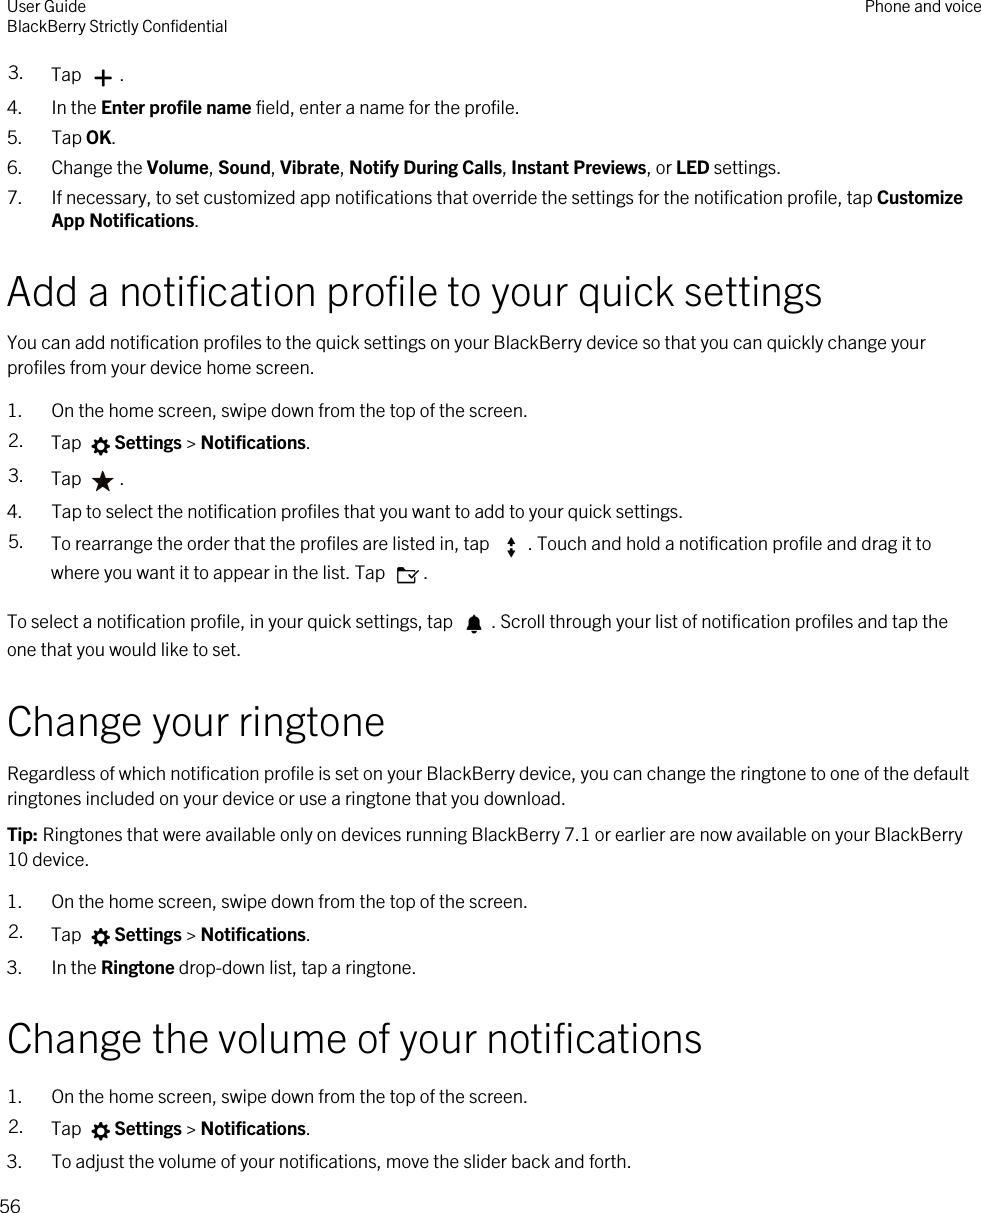 3. Tap  .4. In the Enter profile name field, enter a name for the profile.5. Tap OK.6. Change the Volume, Sound, Vibrate, Notify During Calls, Instant Previews, or LED settings.7. If necessary, to set customized app notifications that override the settings for the notification profile, tap Customize App Notifications.Add a notification profile to your quick settingsYou can add notification profiles to the quick settings on your BlackBerry device so that you can quickly change your profiles from your device home screen.1. On the home screen, swipe down from the top of the screen.2. Tap  Settings &gt; Notifications.3. Tap  .4. Tap to select the notification profiles that you want to add to your quick settings.5. To rearrange the order that the profiles are listed in, tap  . Touch and hold a notification profile and drag it to where you want it to appear in the list. Tap  .To select a notification profile, in your quick settings, tap  . Scroll through your list of notification profiles and tap the one that you would like to set.Change your ringtoneRegardless of which notification profile is set on your BlackBerry device, you can change the ringtone to one of the default ringtones included on your device or use a ringtone that you download.Tip: Ringtones that were available only on devices running BlackBerry 7.1 or earlier are now available on your BlackBerry 10 device.1. On the home screen, swipe down from the top of the screen.2. Tap  Settings &gt; Notifications.3. In the Ringtone drop-down list, tap a ringtone.Change the volume of your notifications1. On the home screen, swipe down from the top of the screen.2. Tap  Settings &gt; Notifications.3. To adjust the volume of your notifications, move the slider back and forth.User GuideBlackBerry Strictly Confidential Phone and voice56